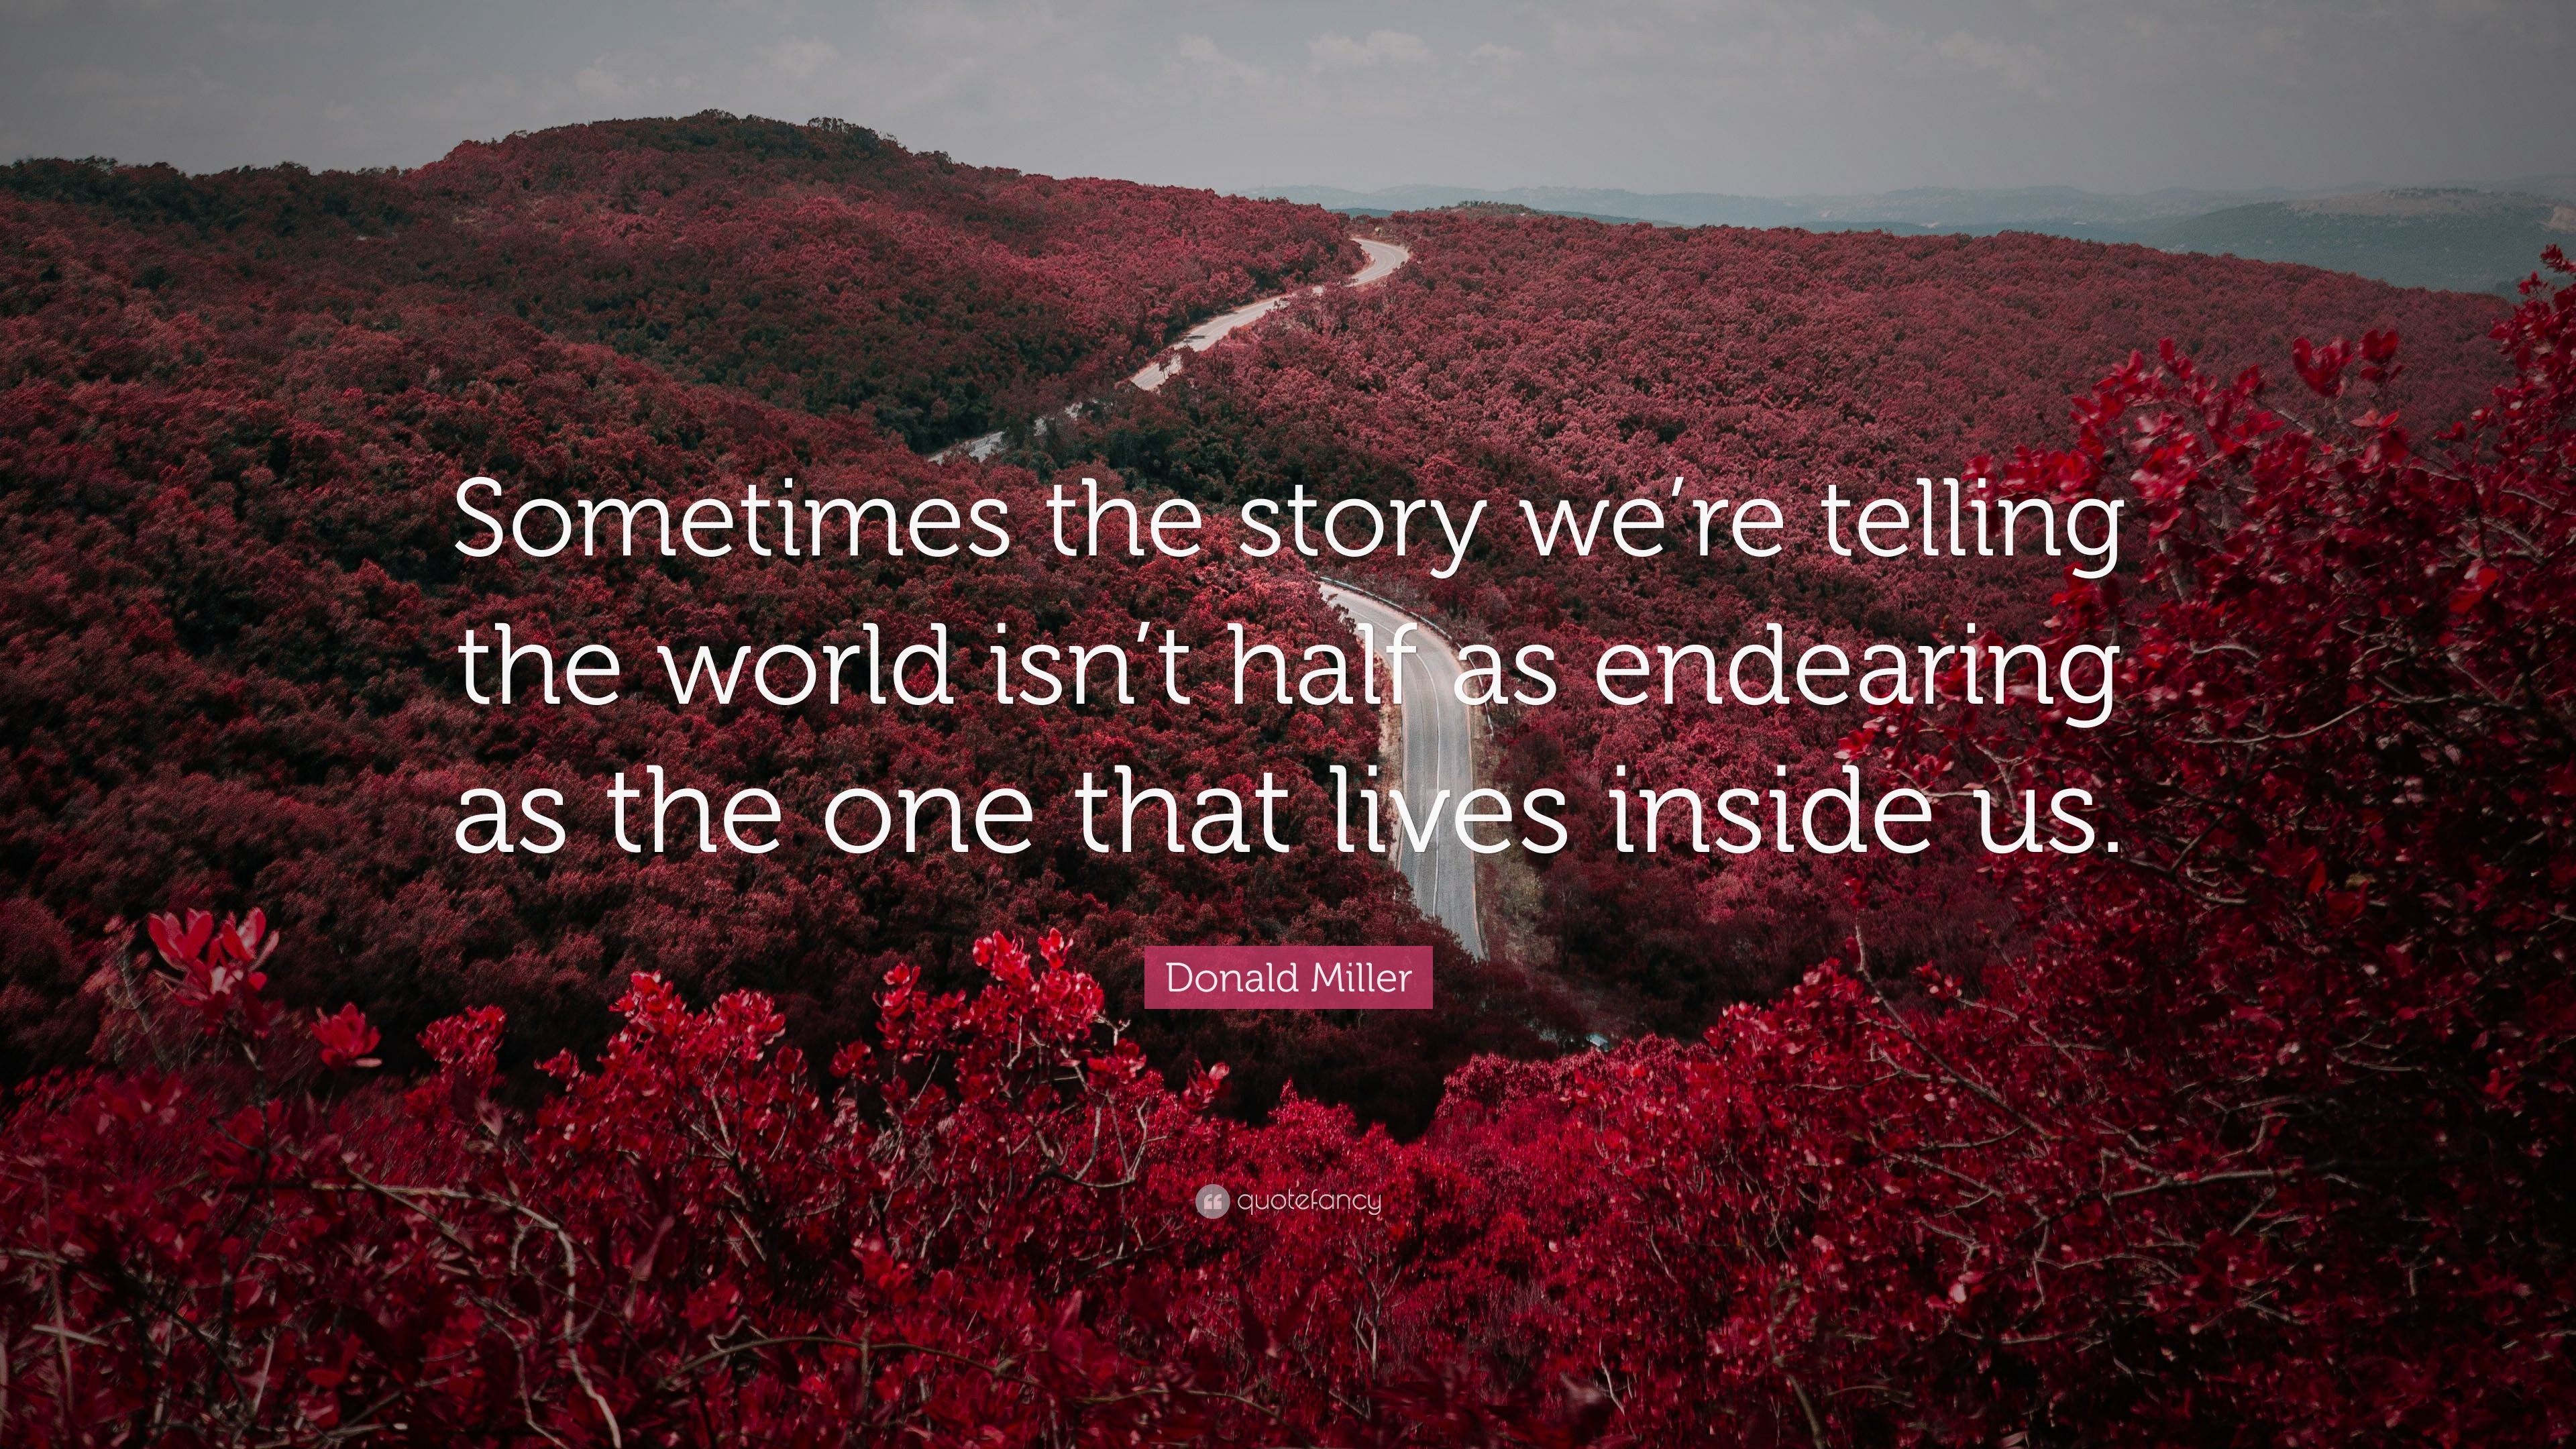 Donald Miller Quote: "Sometimes the story we're telling the world isn't half as endearing as the ...